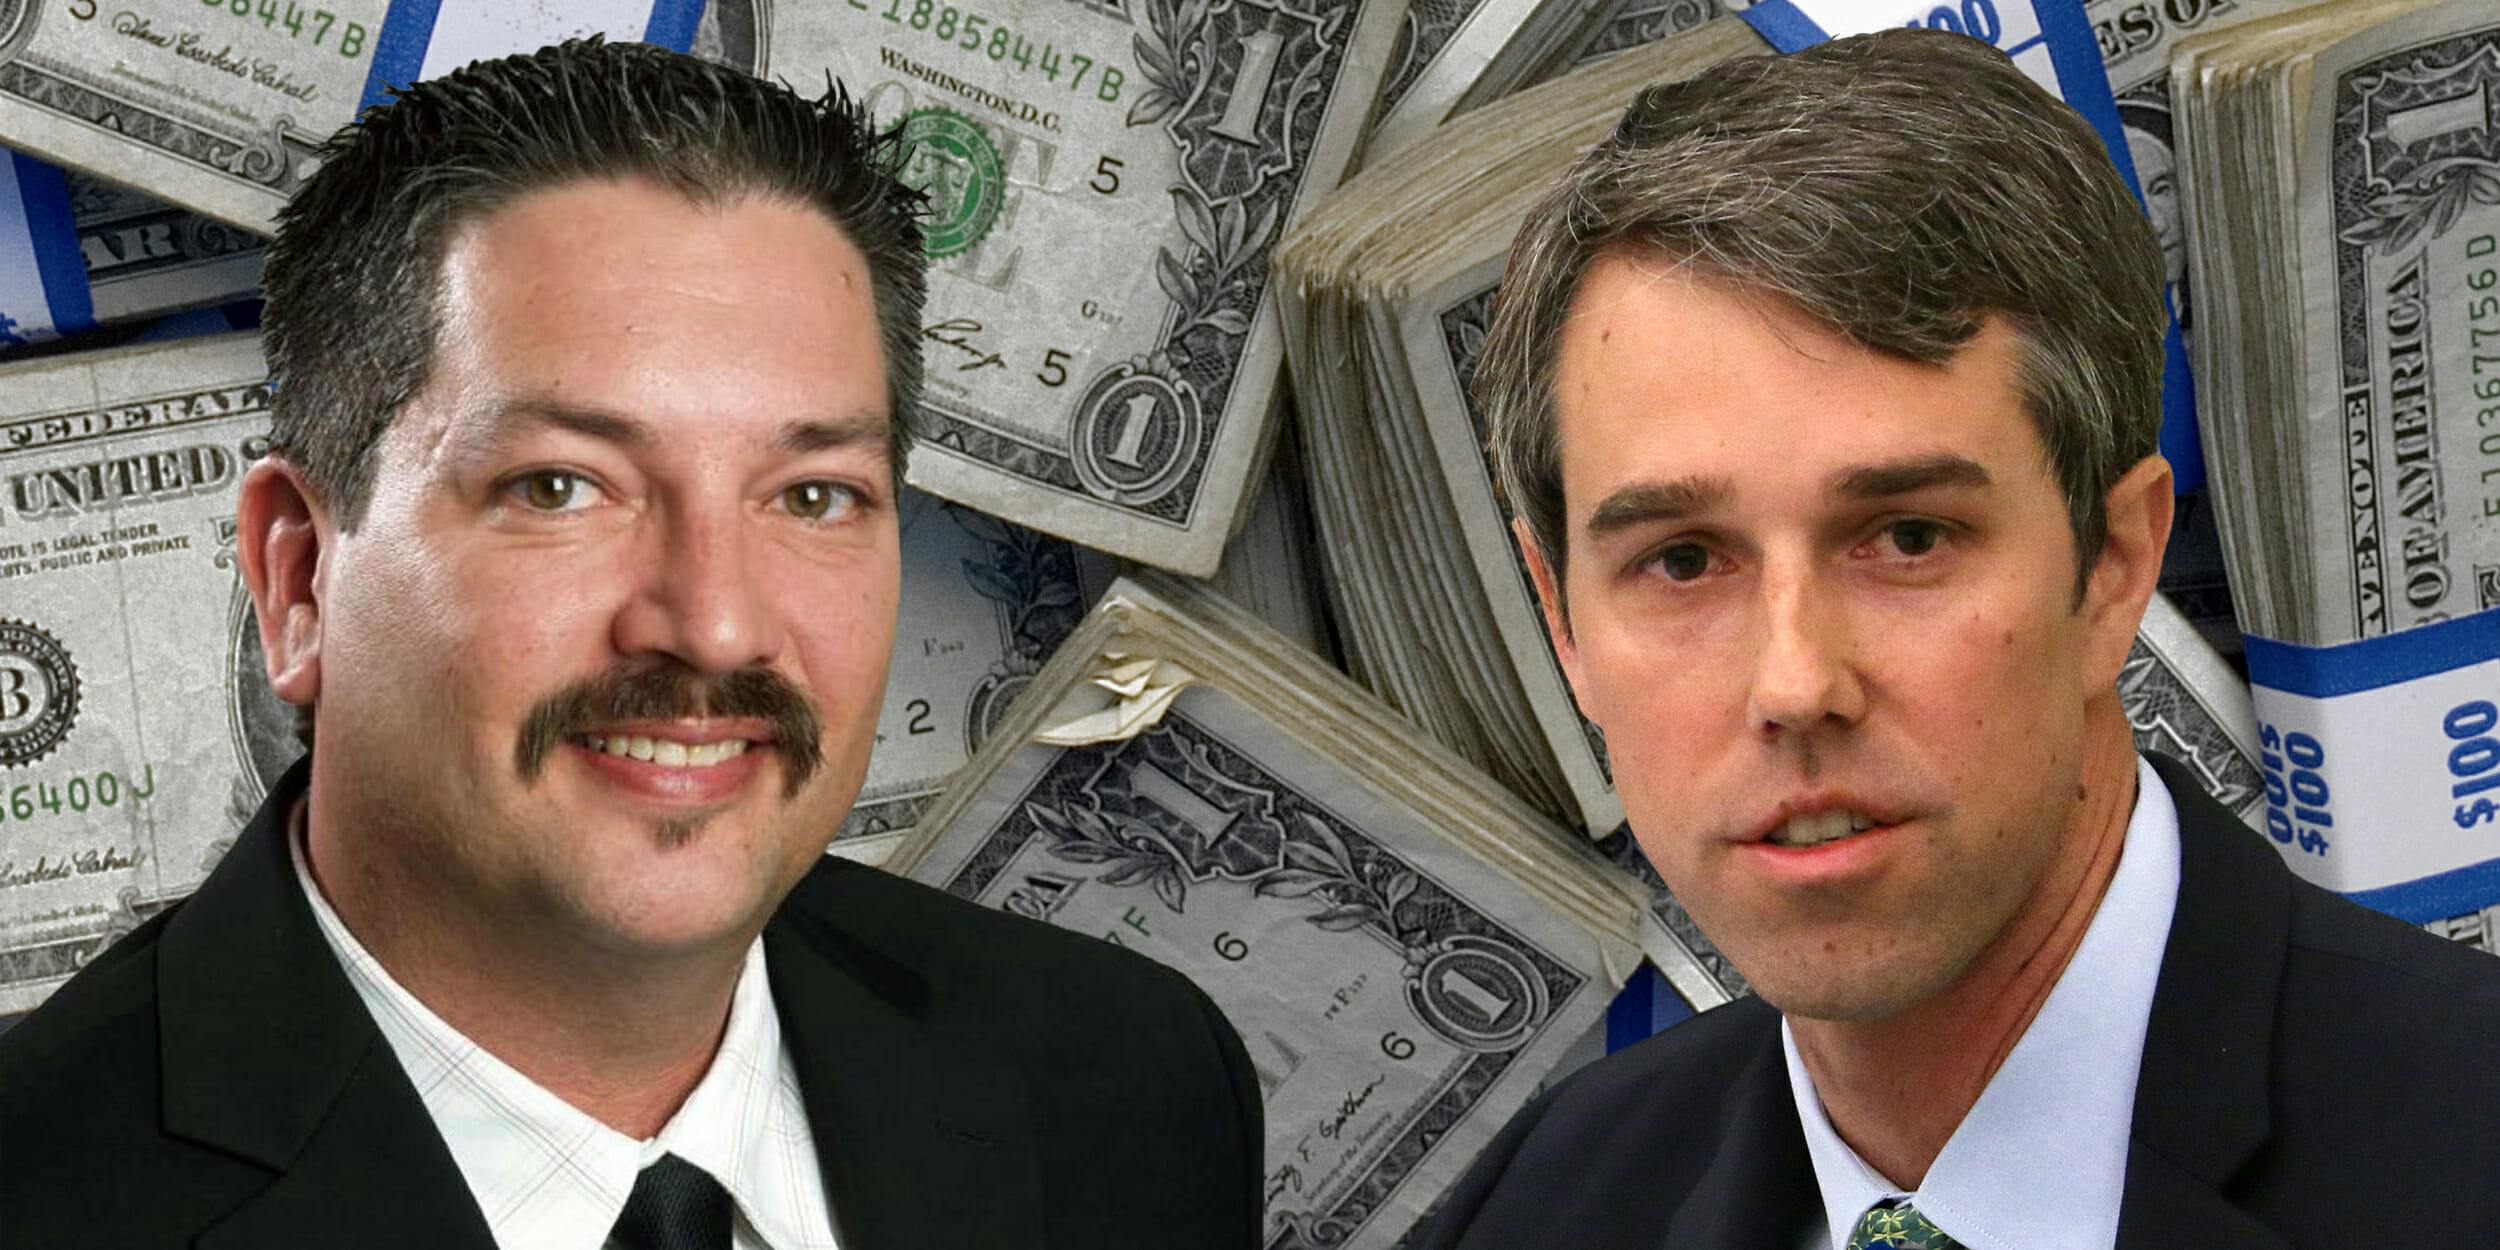 Randy Bryce and Beto O'Rourke in front of stacks of US currency